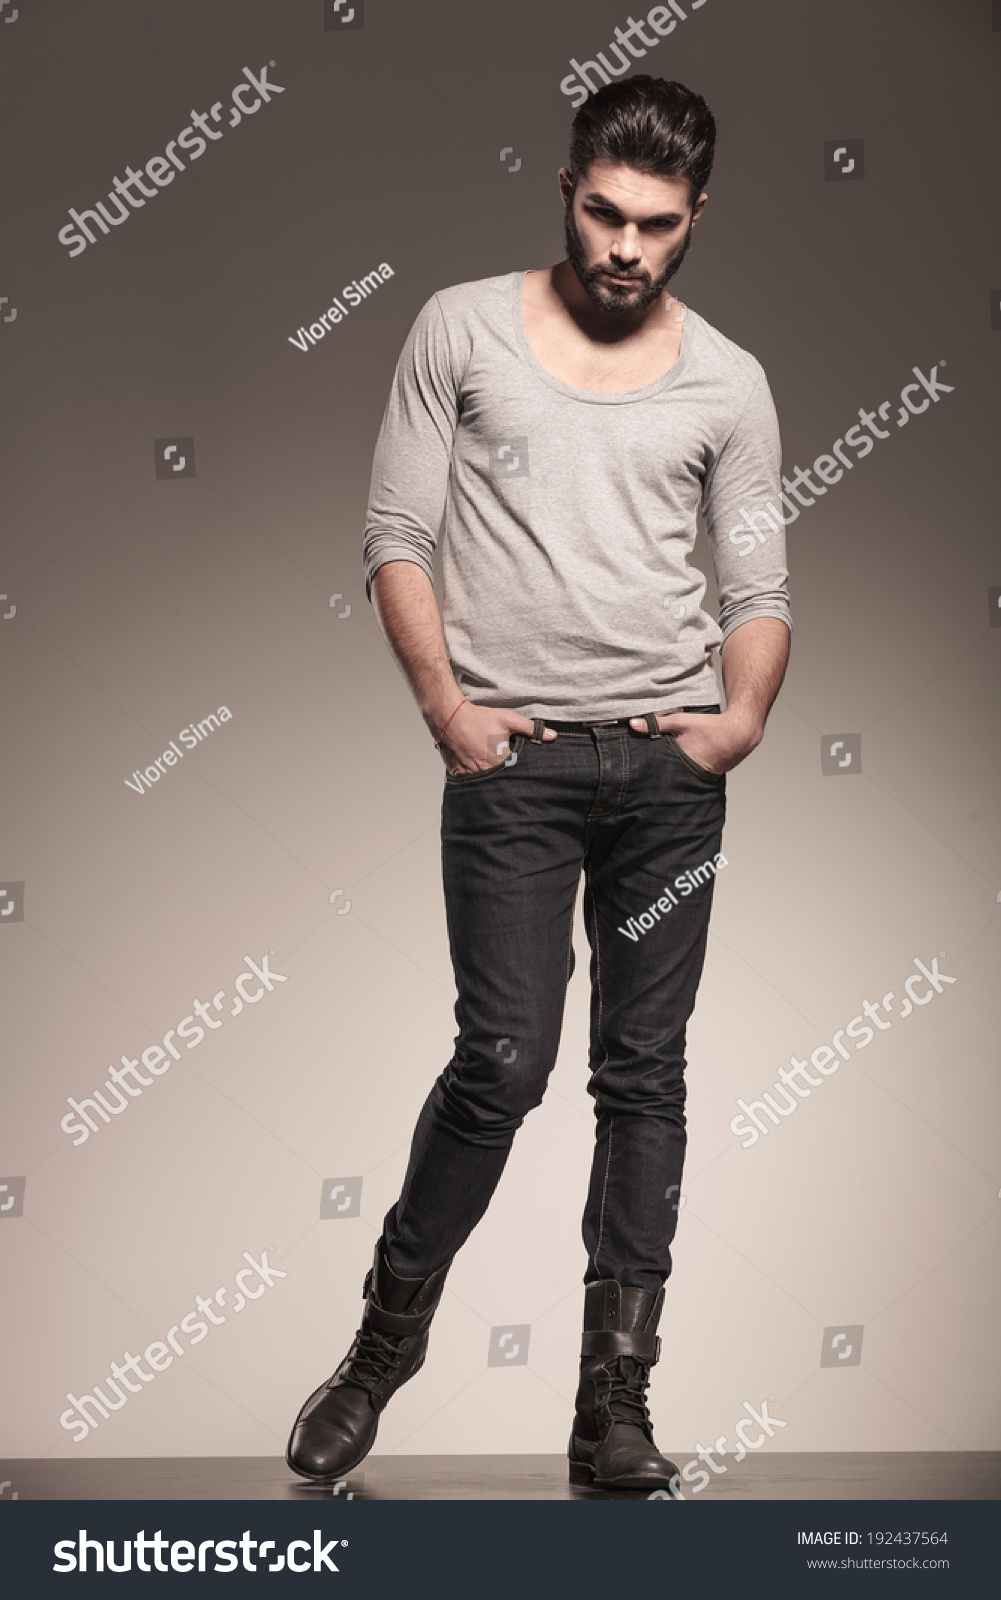 Serious Fashion Model Posing With Hands In His Pockets In Studio Stock ...